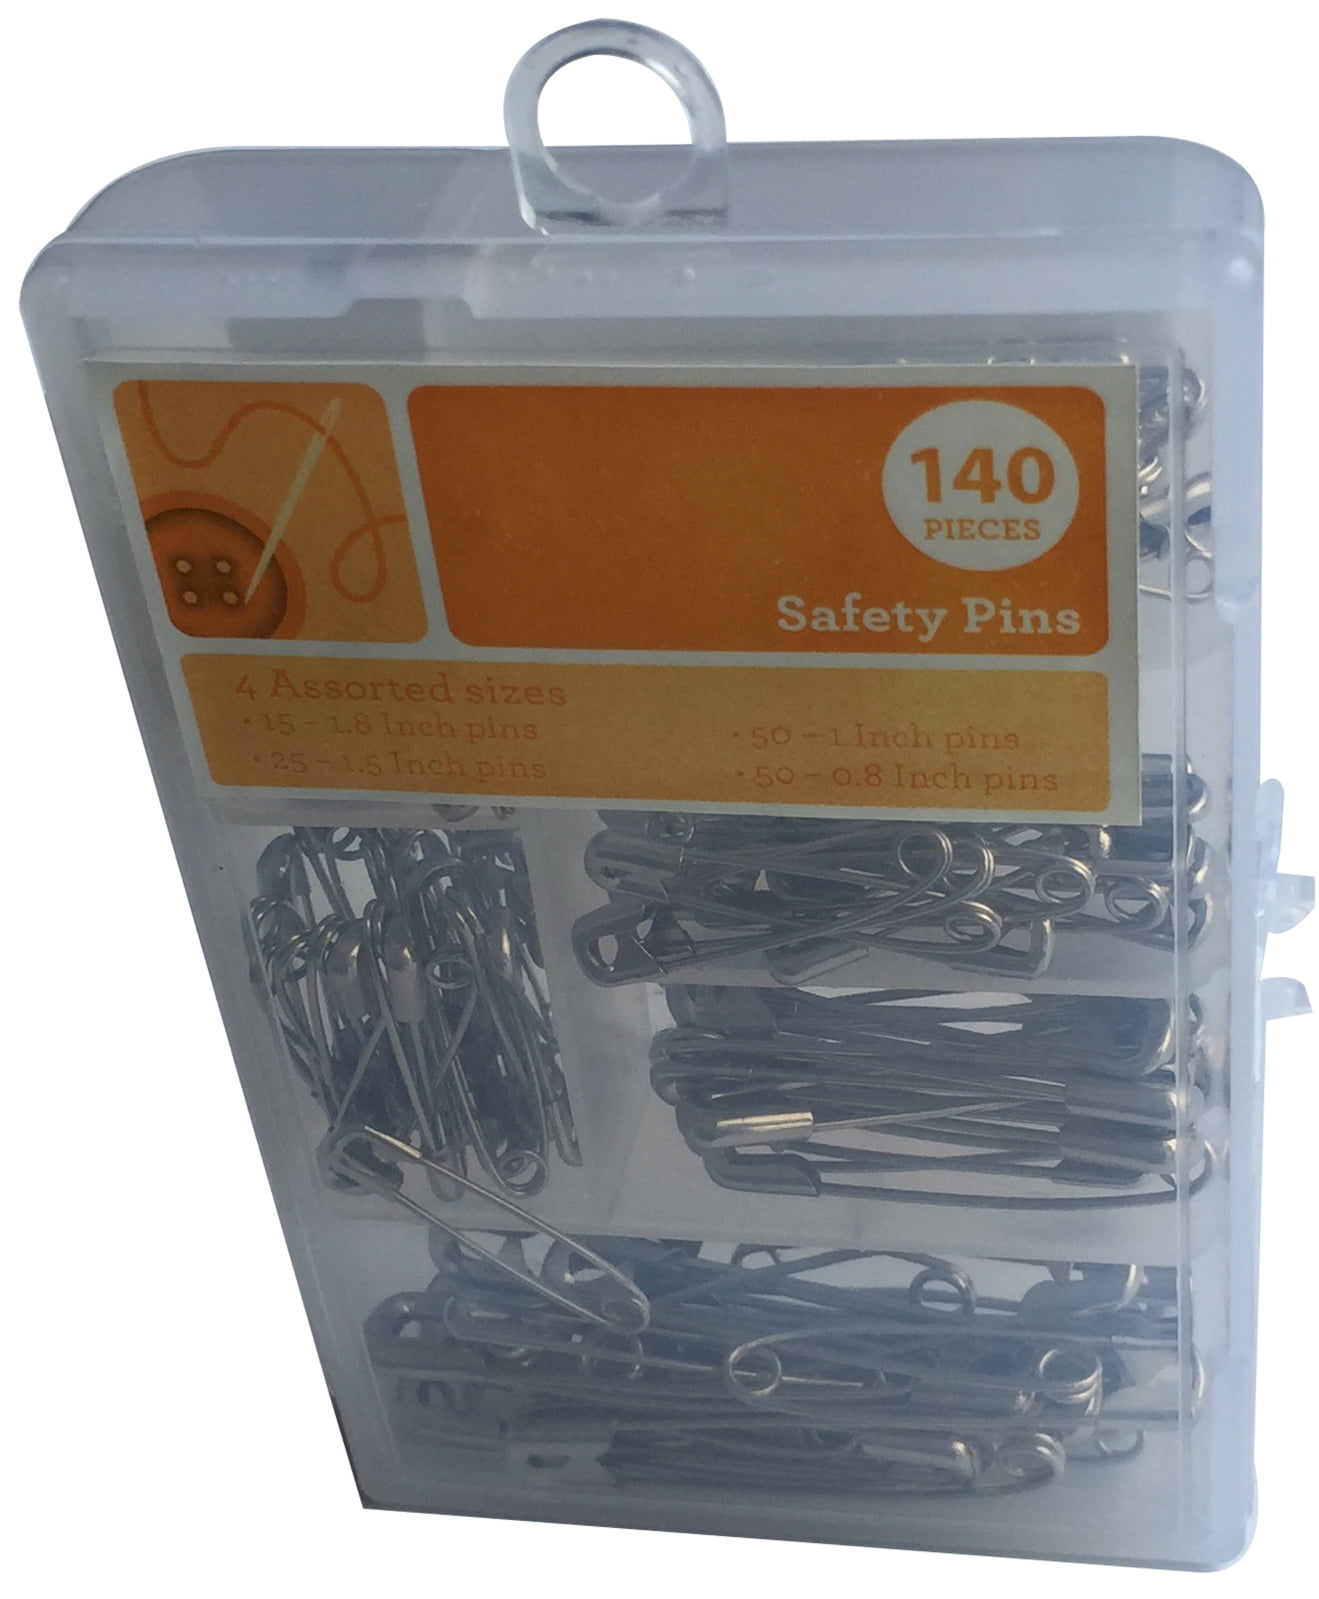  uxcell 100PCS Safety Pins, Small Safety Pins, 0.8 x